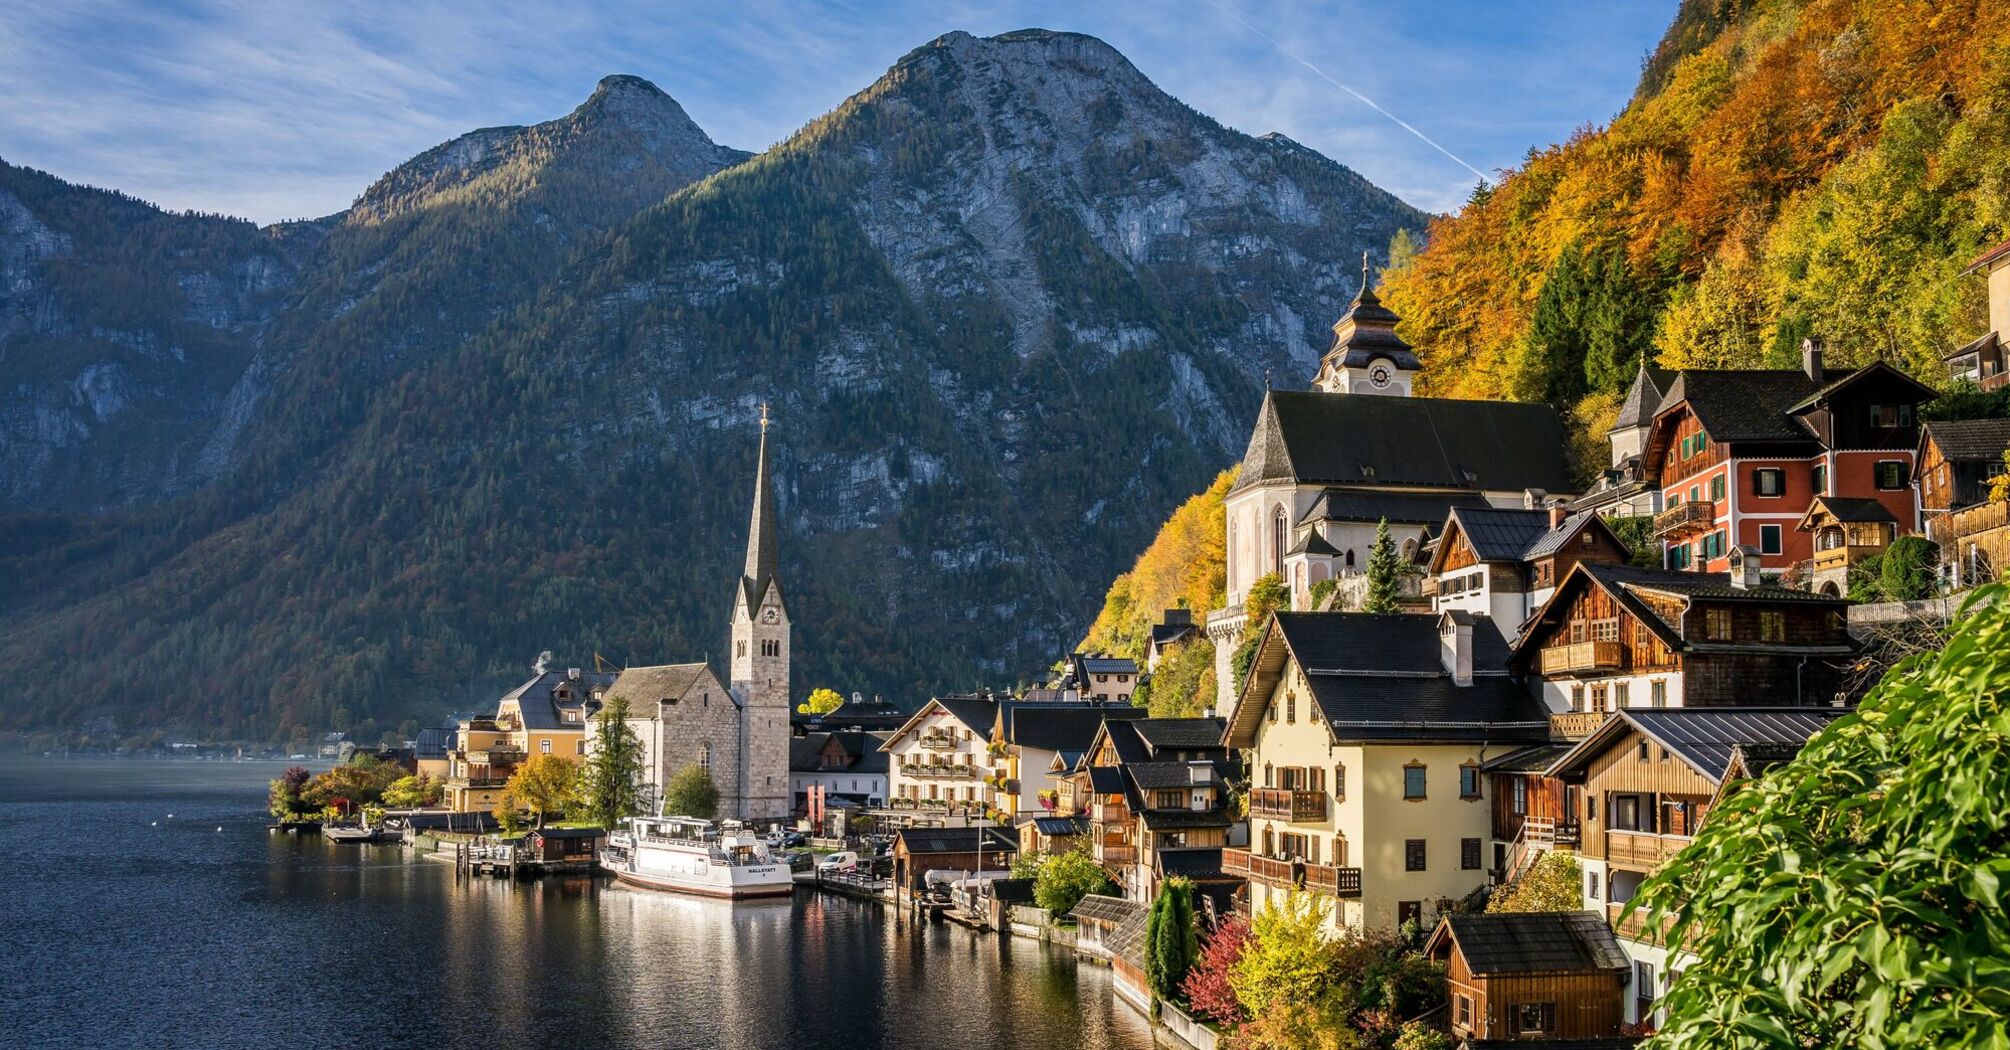 Travel season in Austria: when to visit and what to see